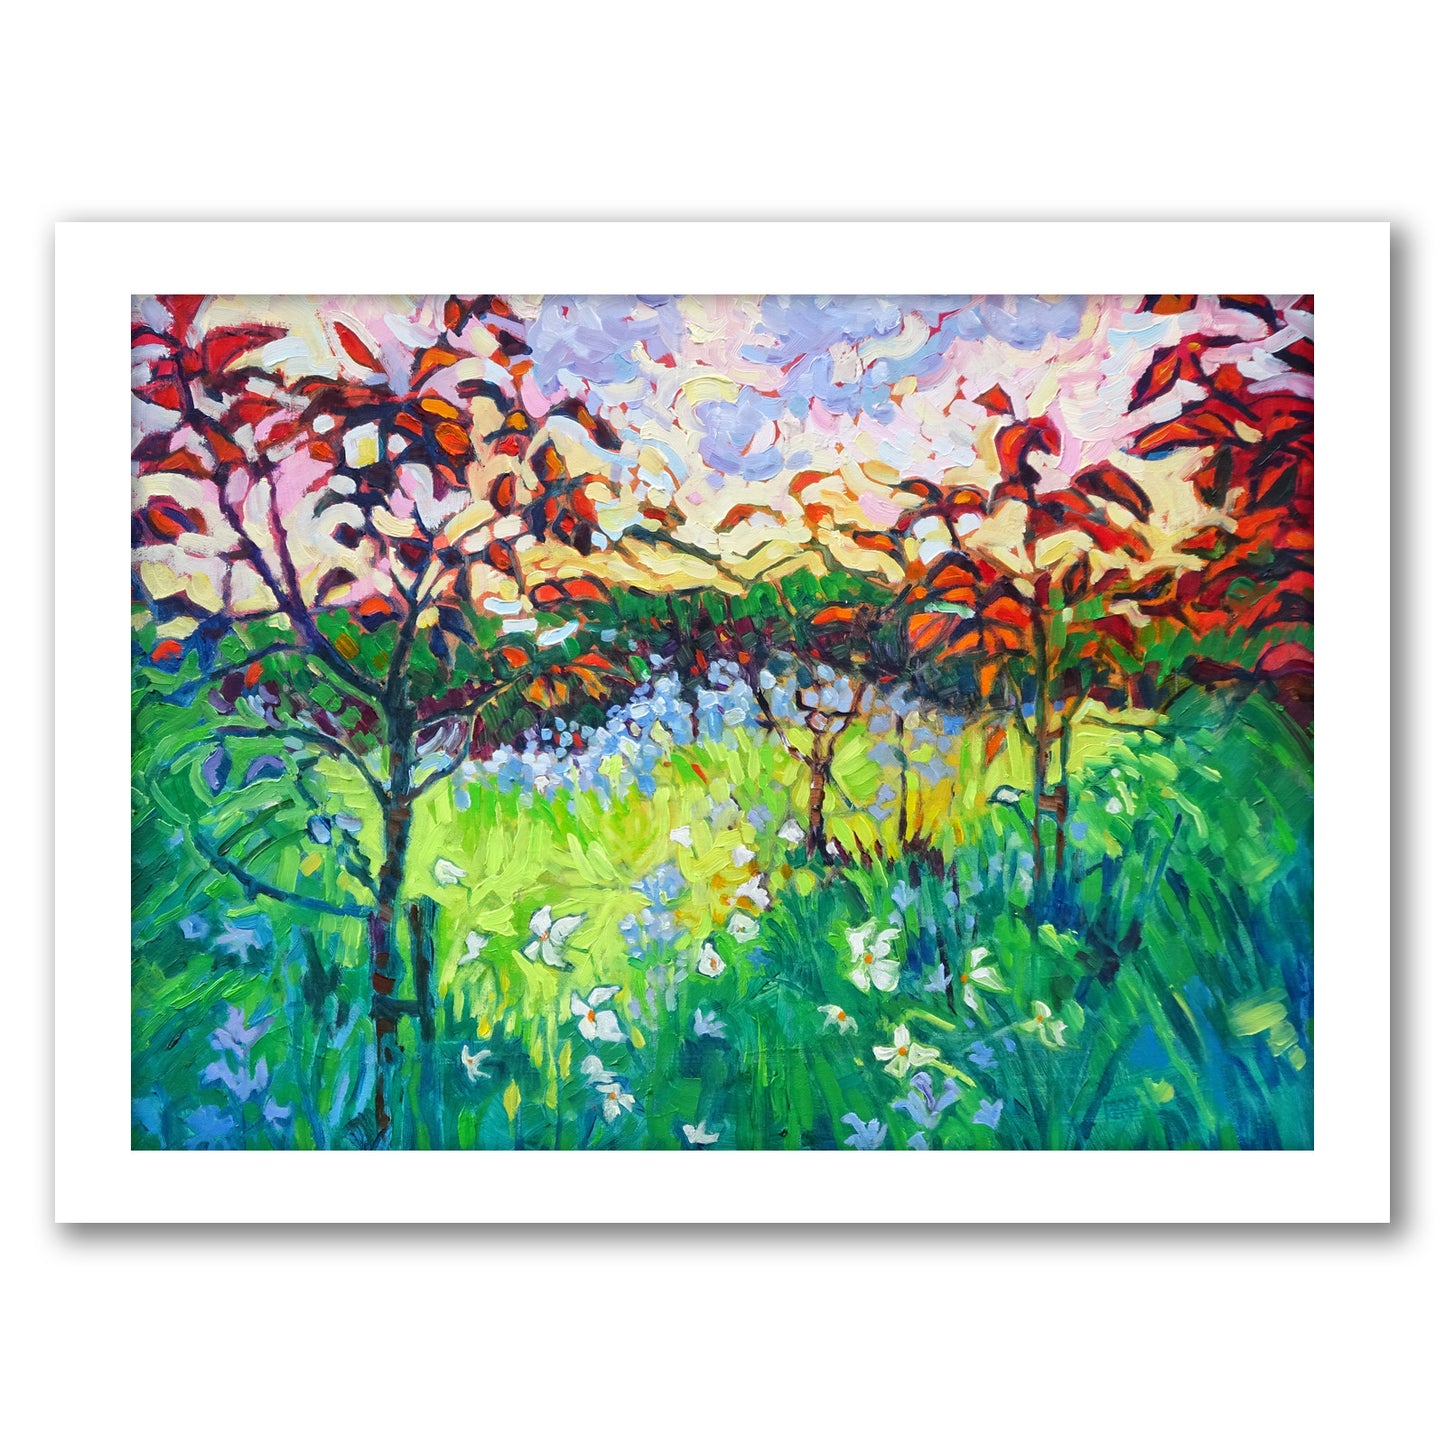 Garden At Houghton Hall By Mary Kemp - Framed Print